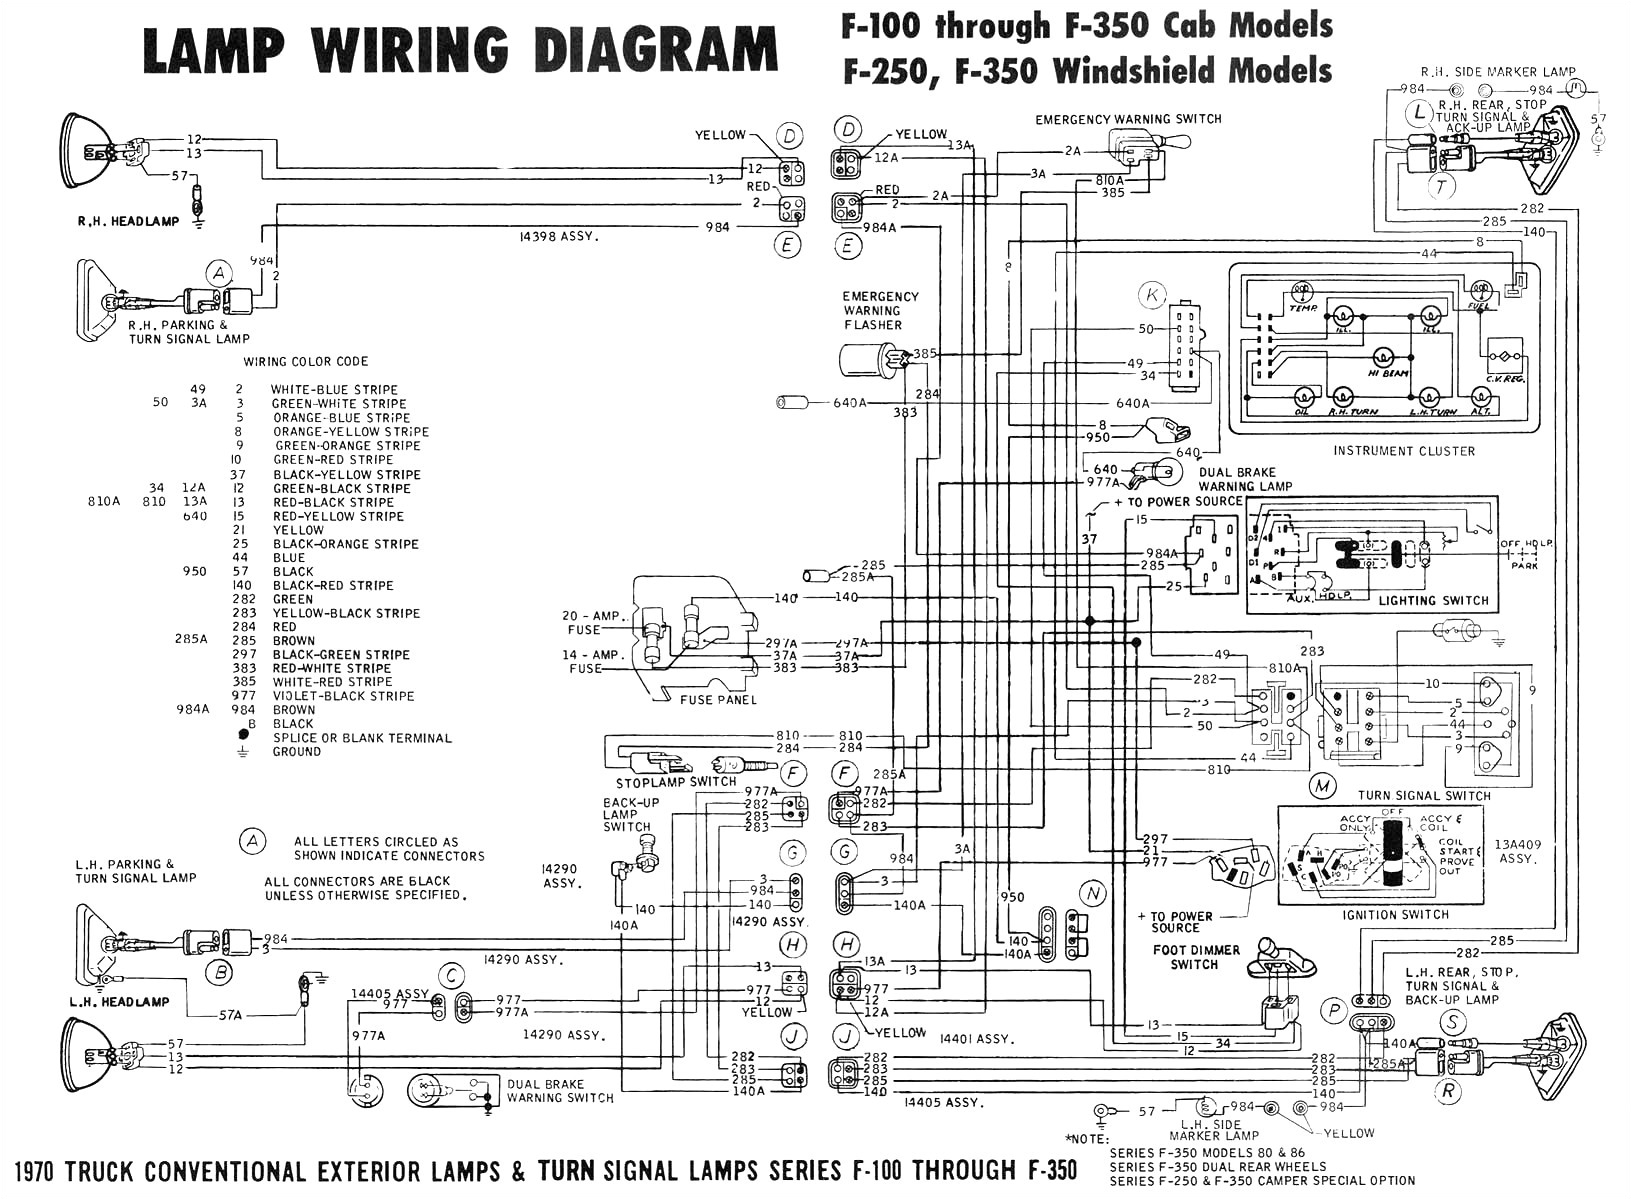 1979 ford f 250 starter wiring wiring diagram operations 1963 ford f 250 distributor wiring